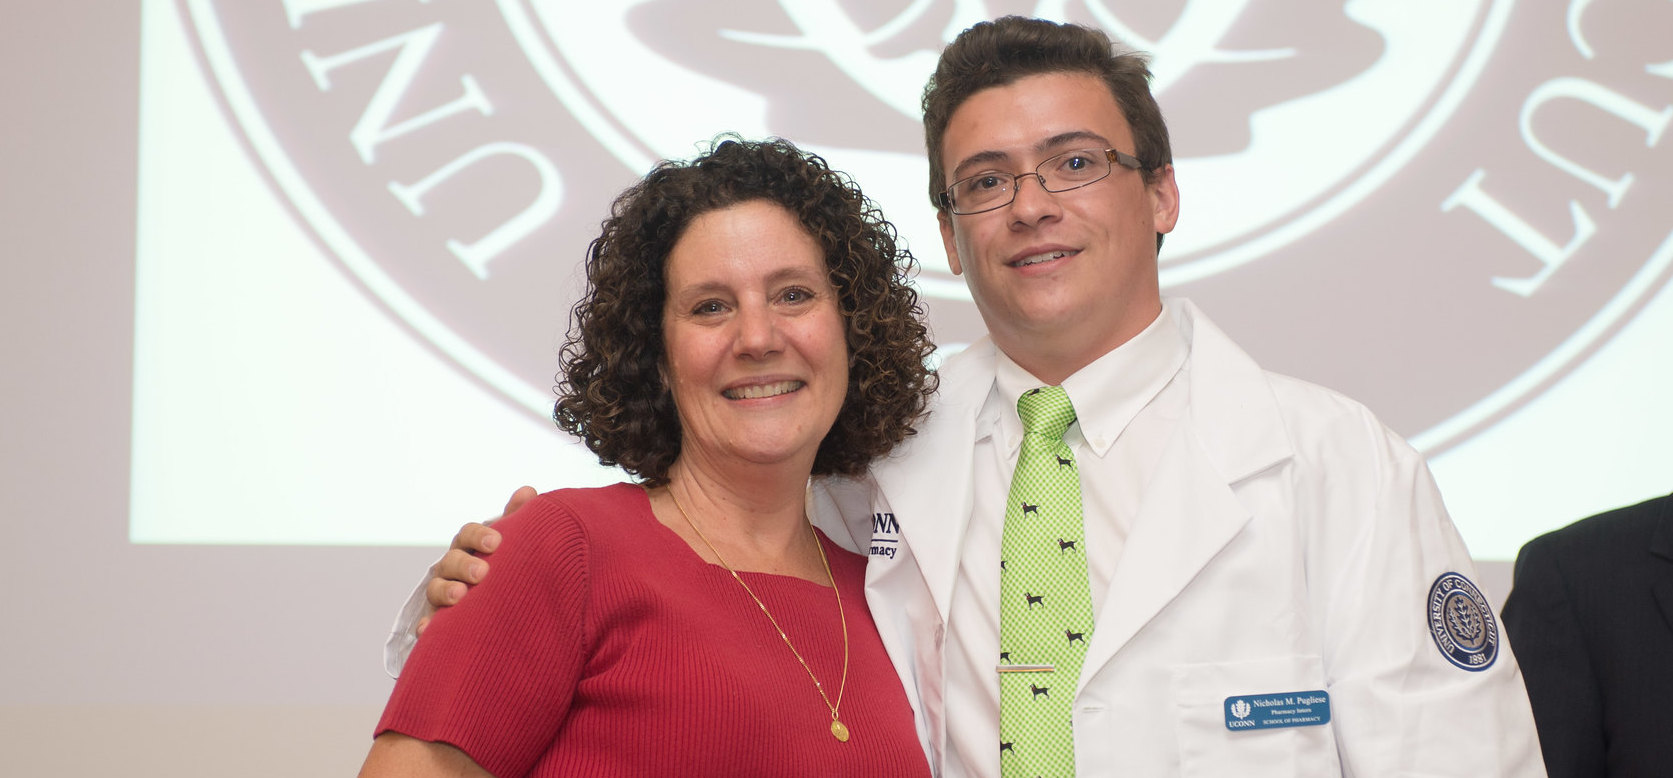 Nicholas Pugliese at white coat ceremony in 2017 with Dr. Jill Fitzgerald.